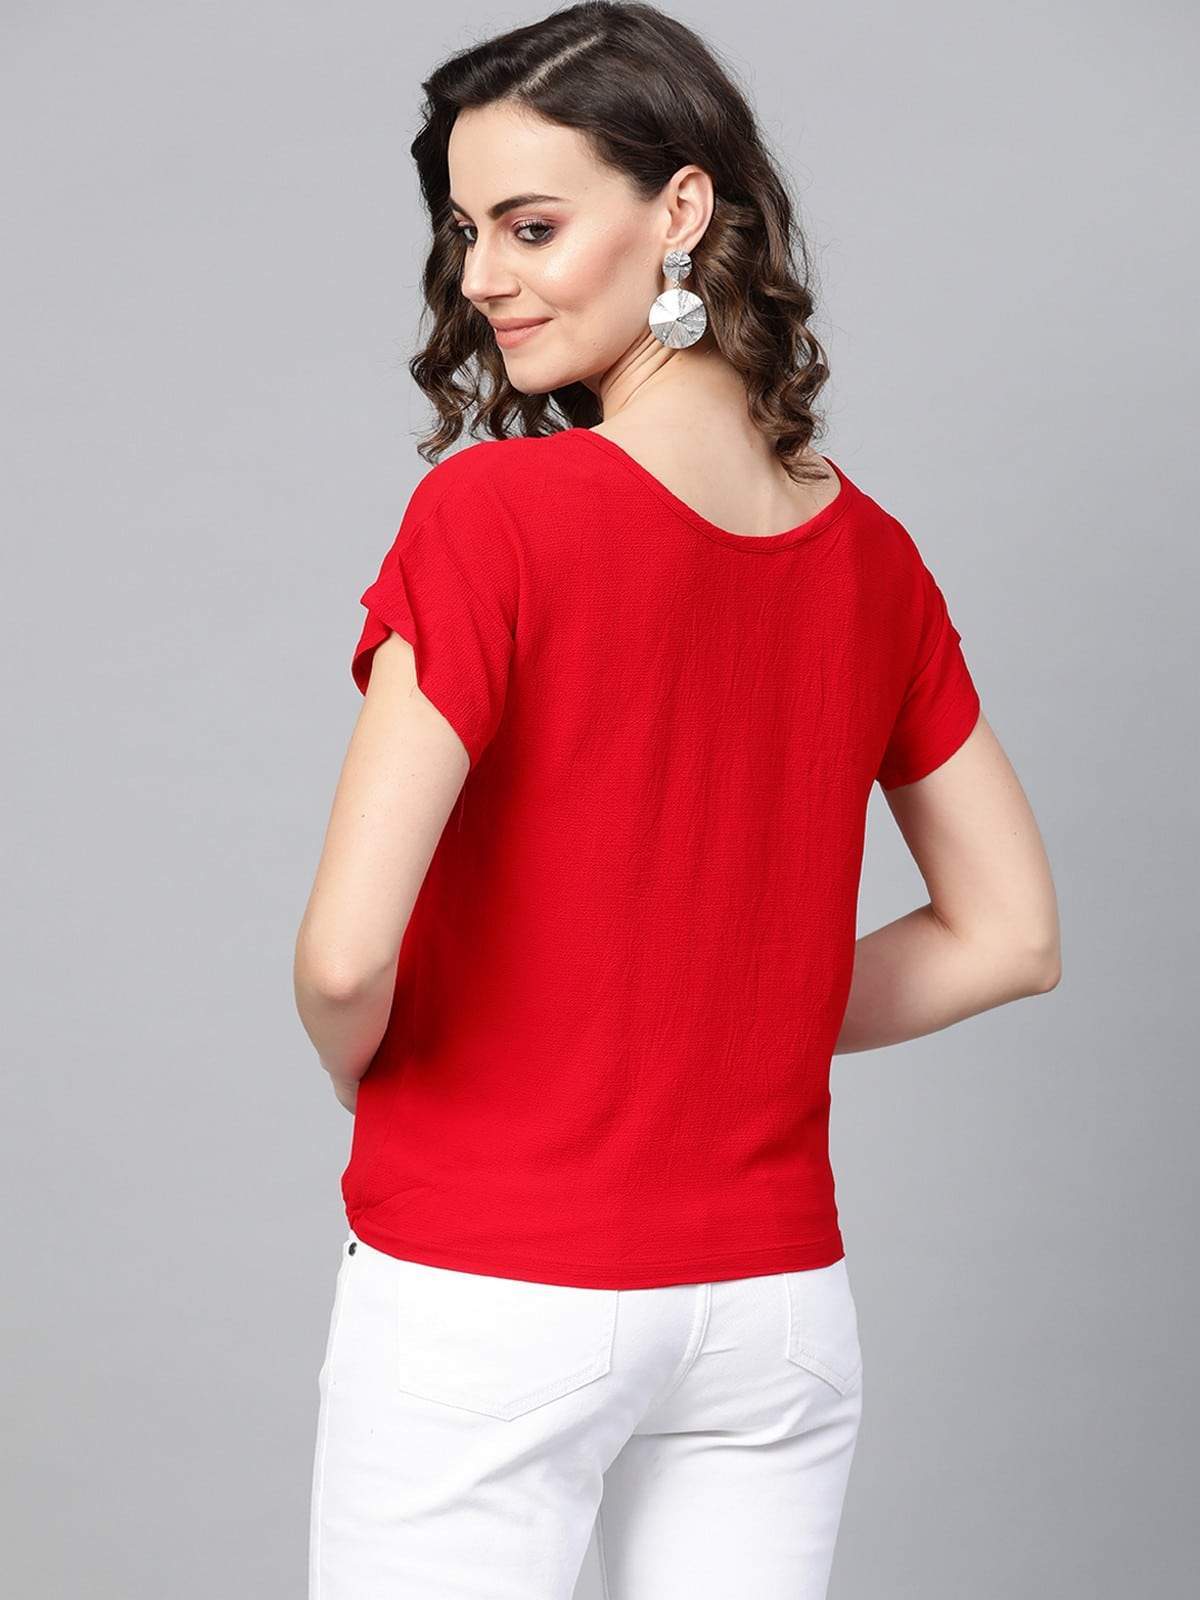 Women's Red Bubble Loose Fit Tunnel Top - Pannkh